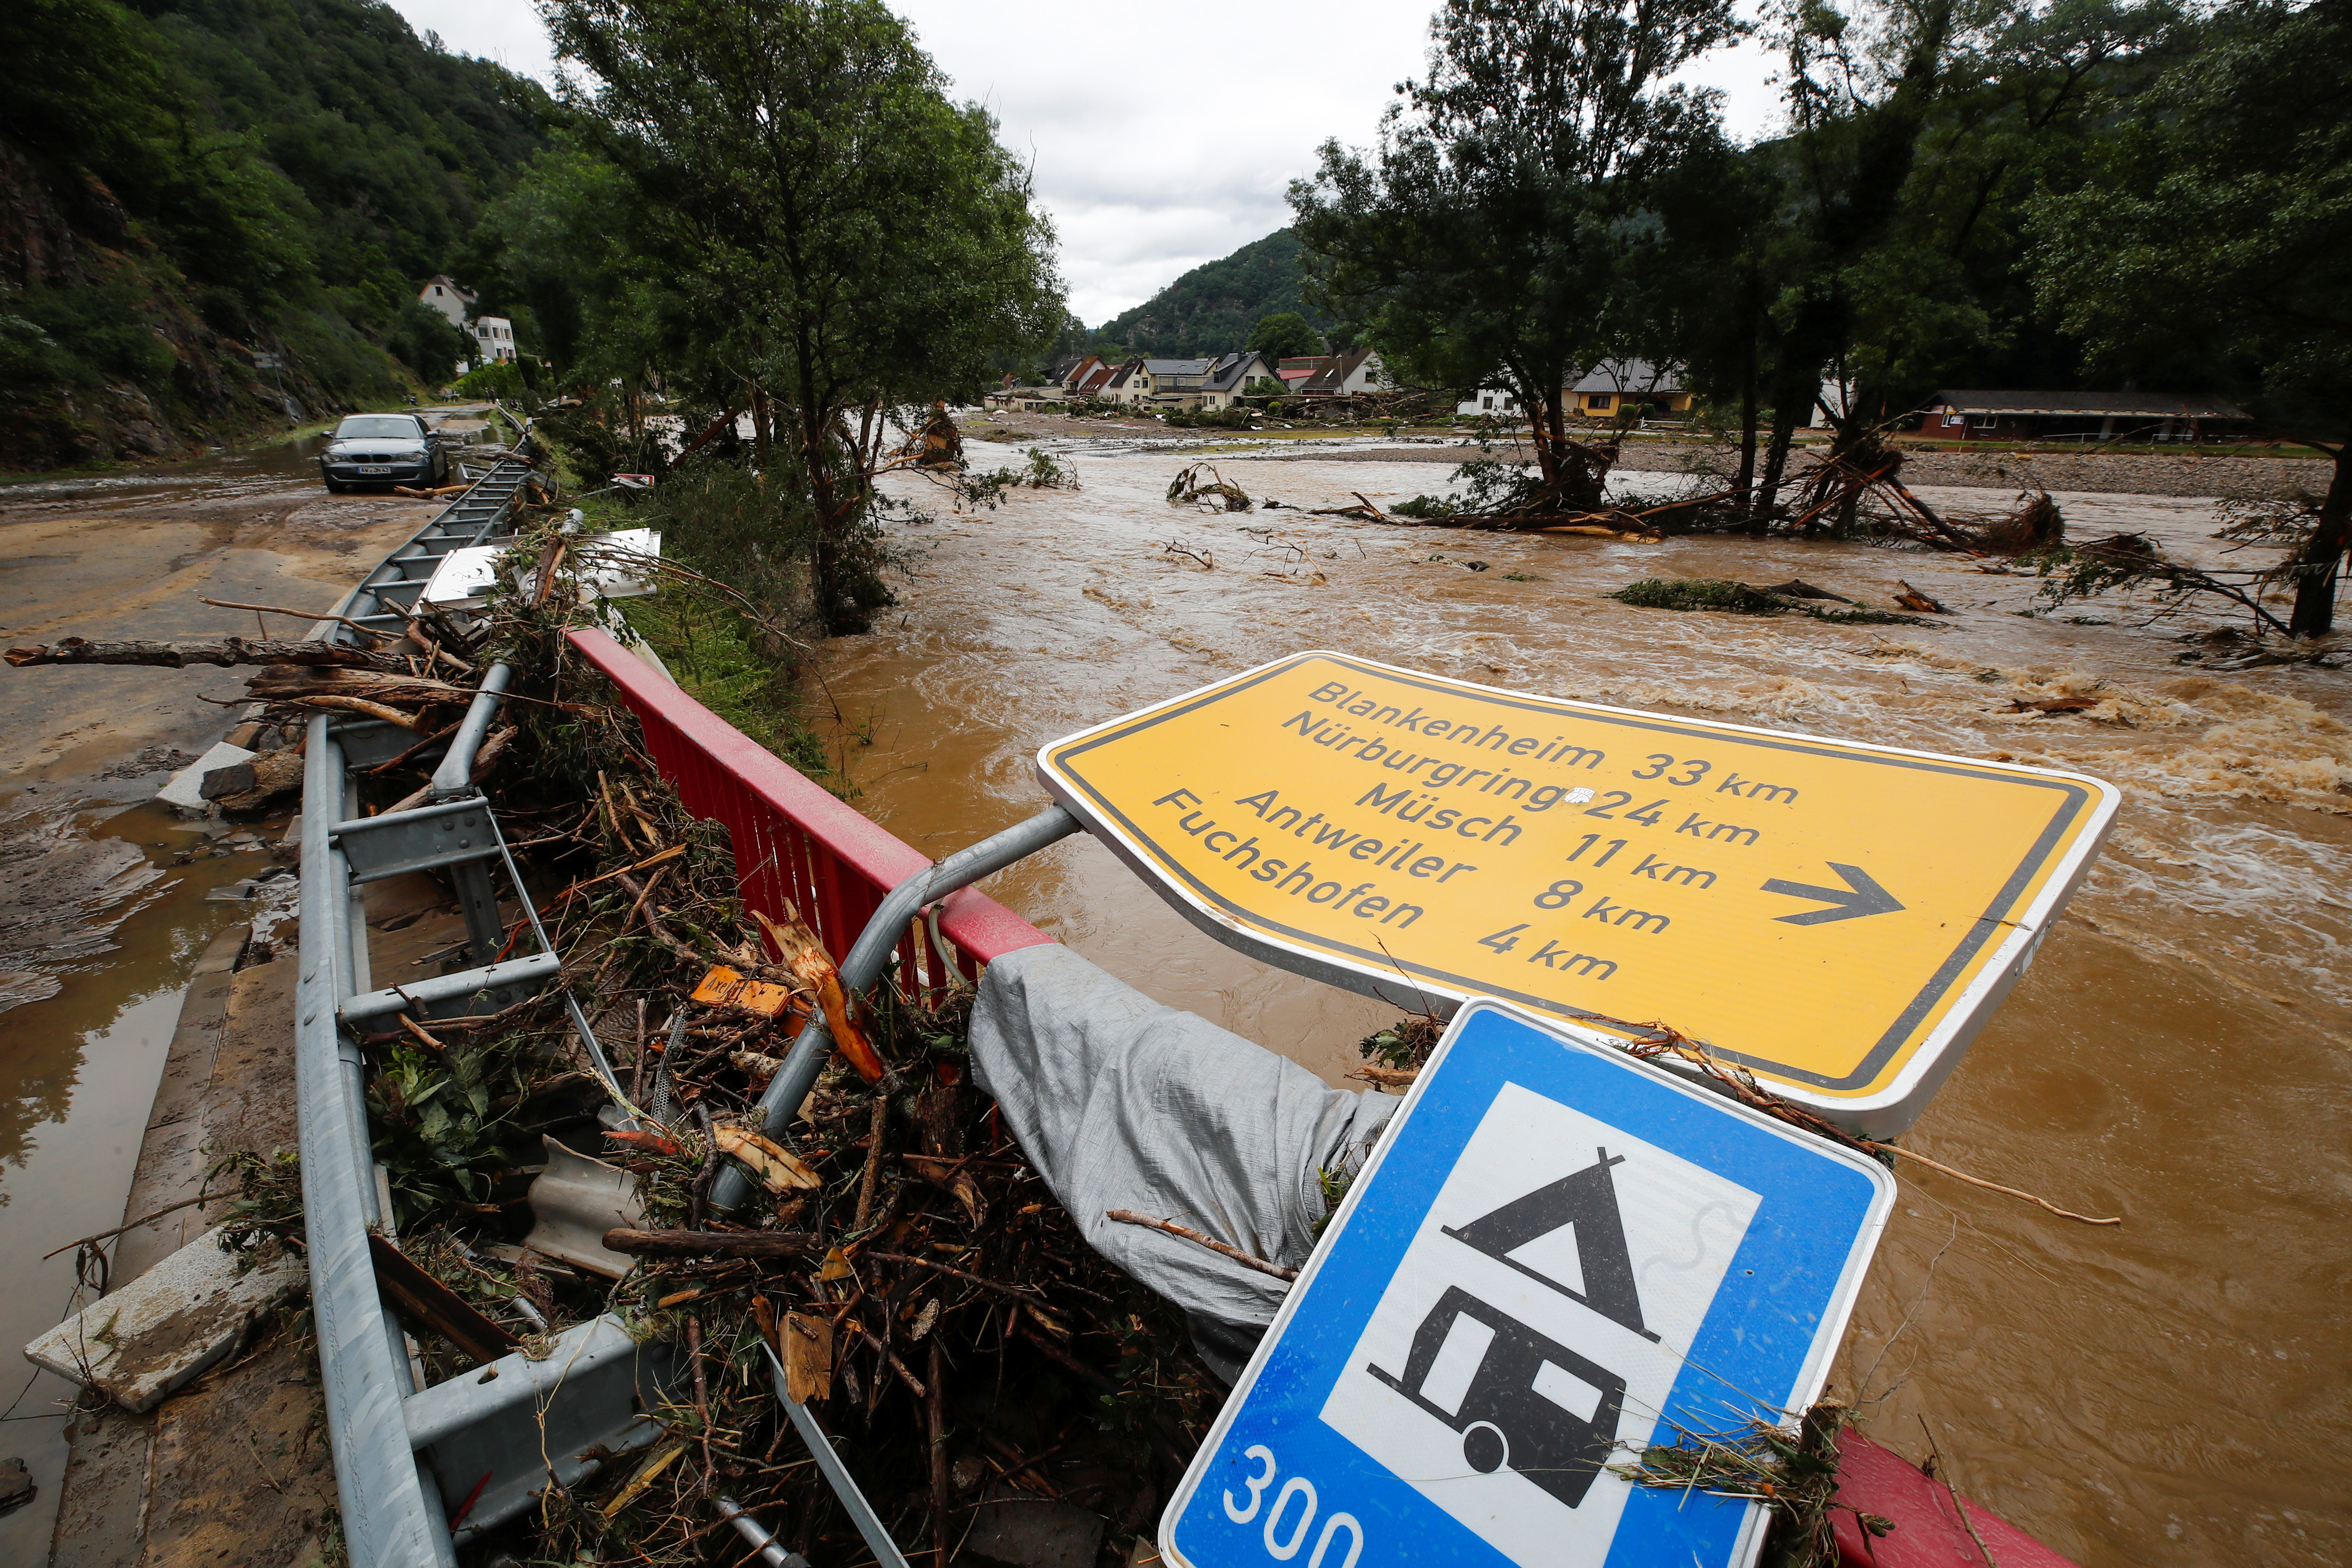 A collapsed sign is seen next to a river at a flood-affected area, following heavy rainfalls, in Schuld, Germany, July 15, 2021. REUTERS/Wolfgang Rattay